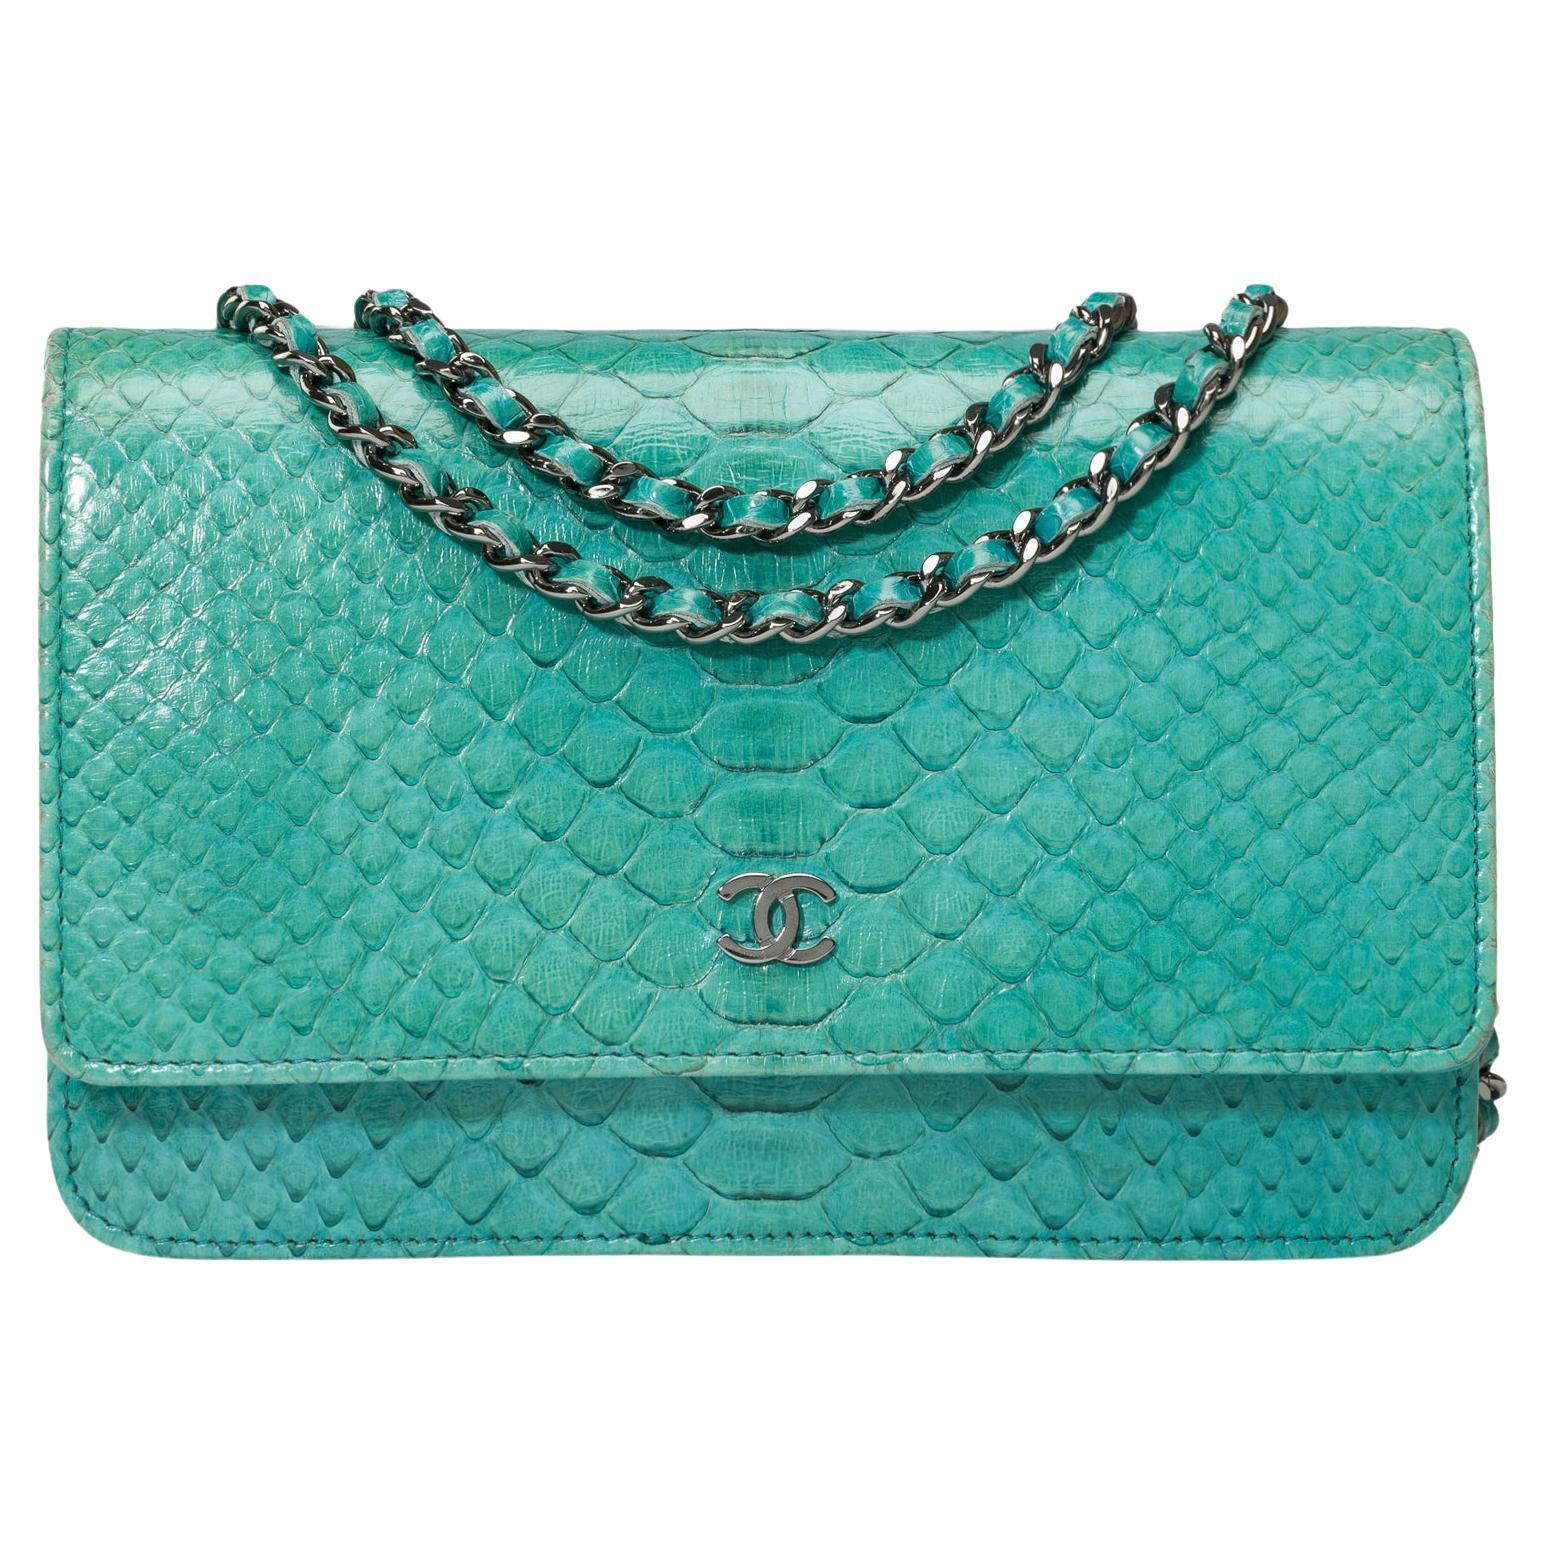 Chanel Wallet on Chain (WOC)  shoulder bag in Turquoise Blue Python leather, SHW